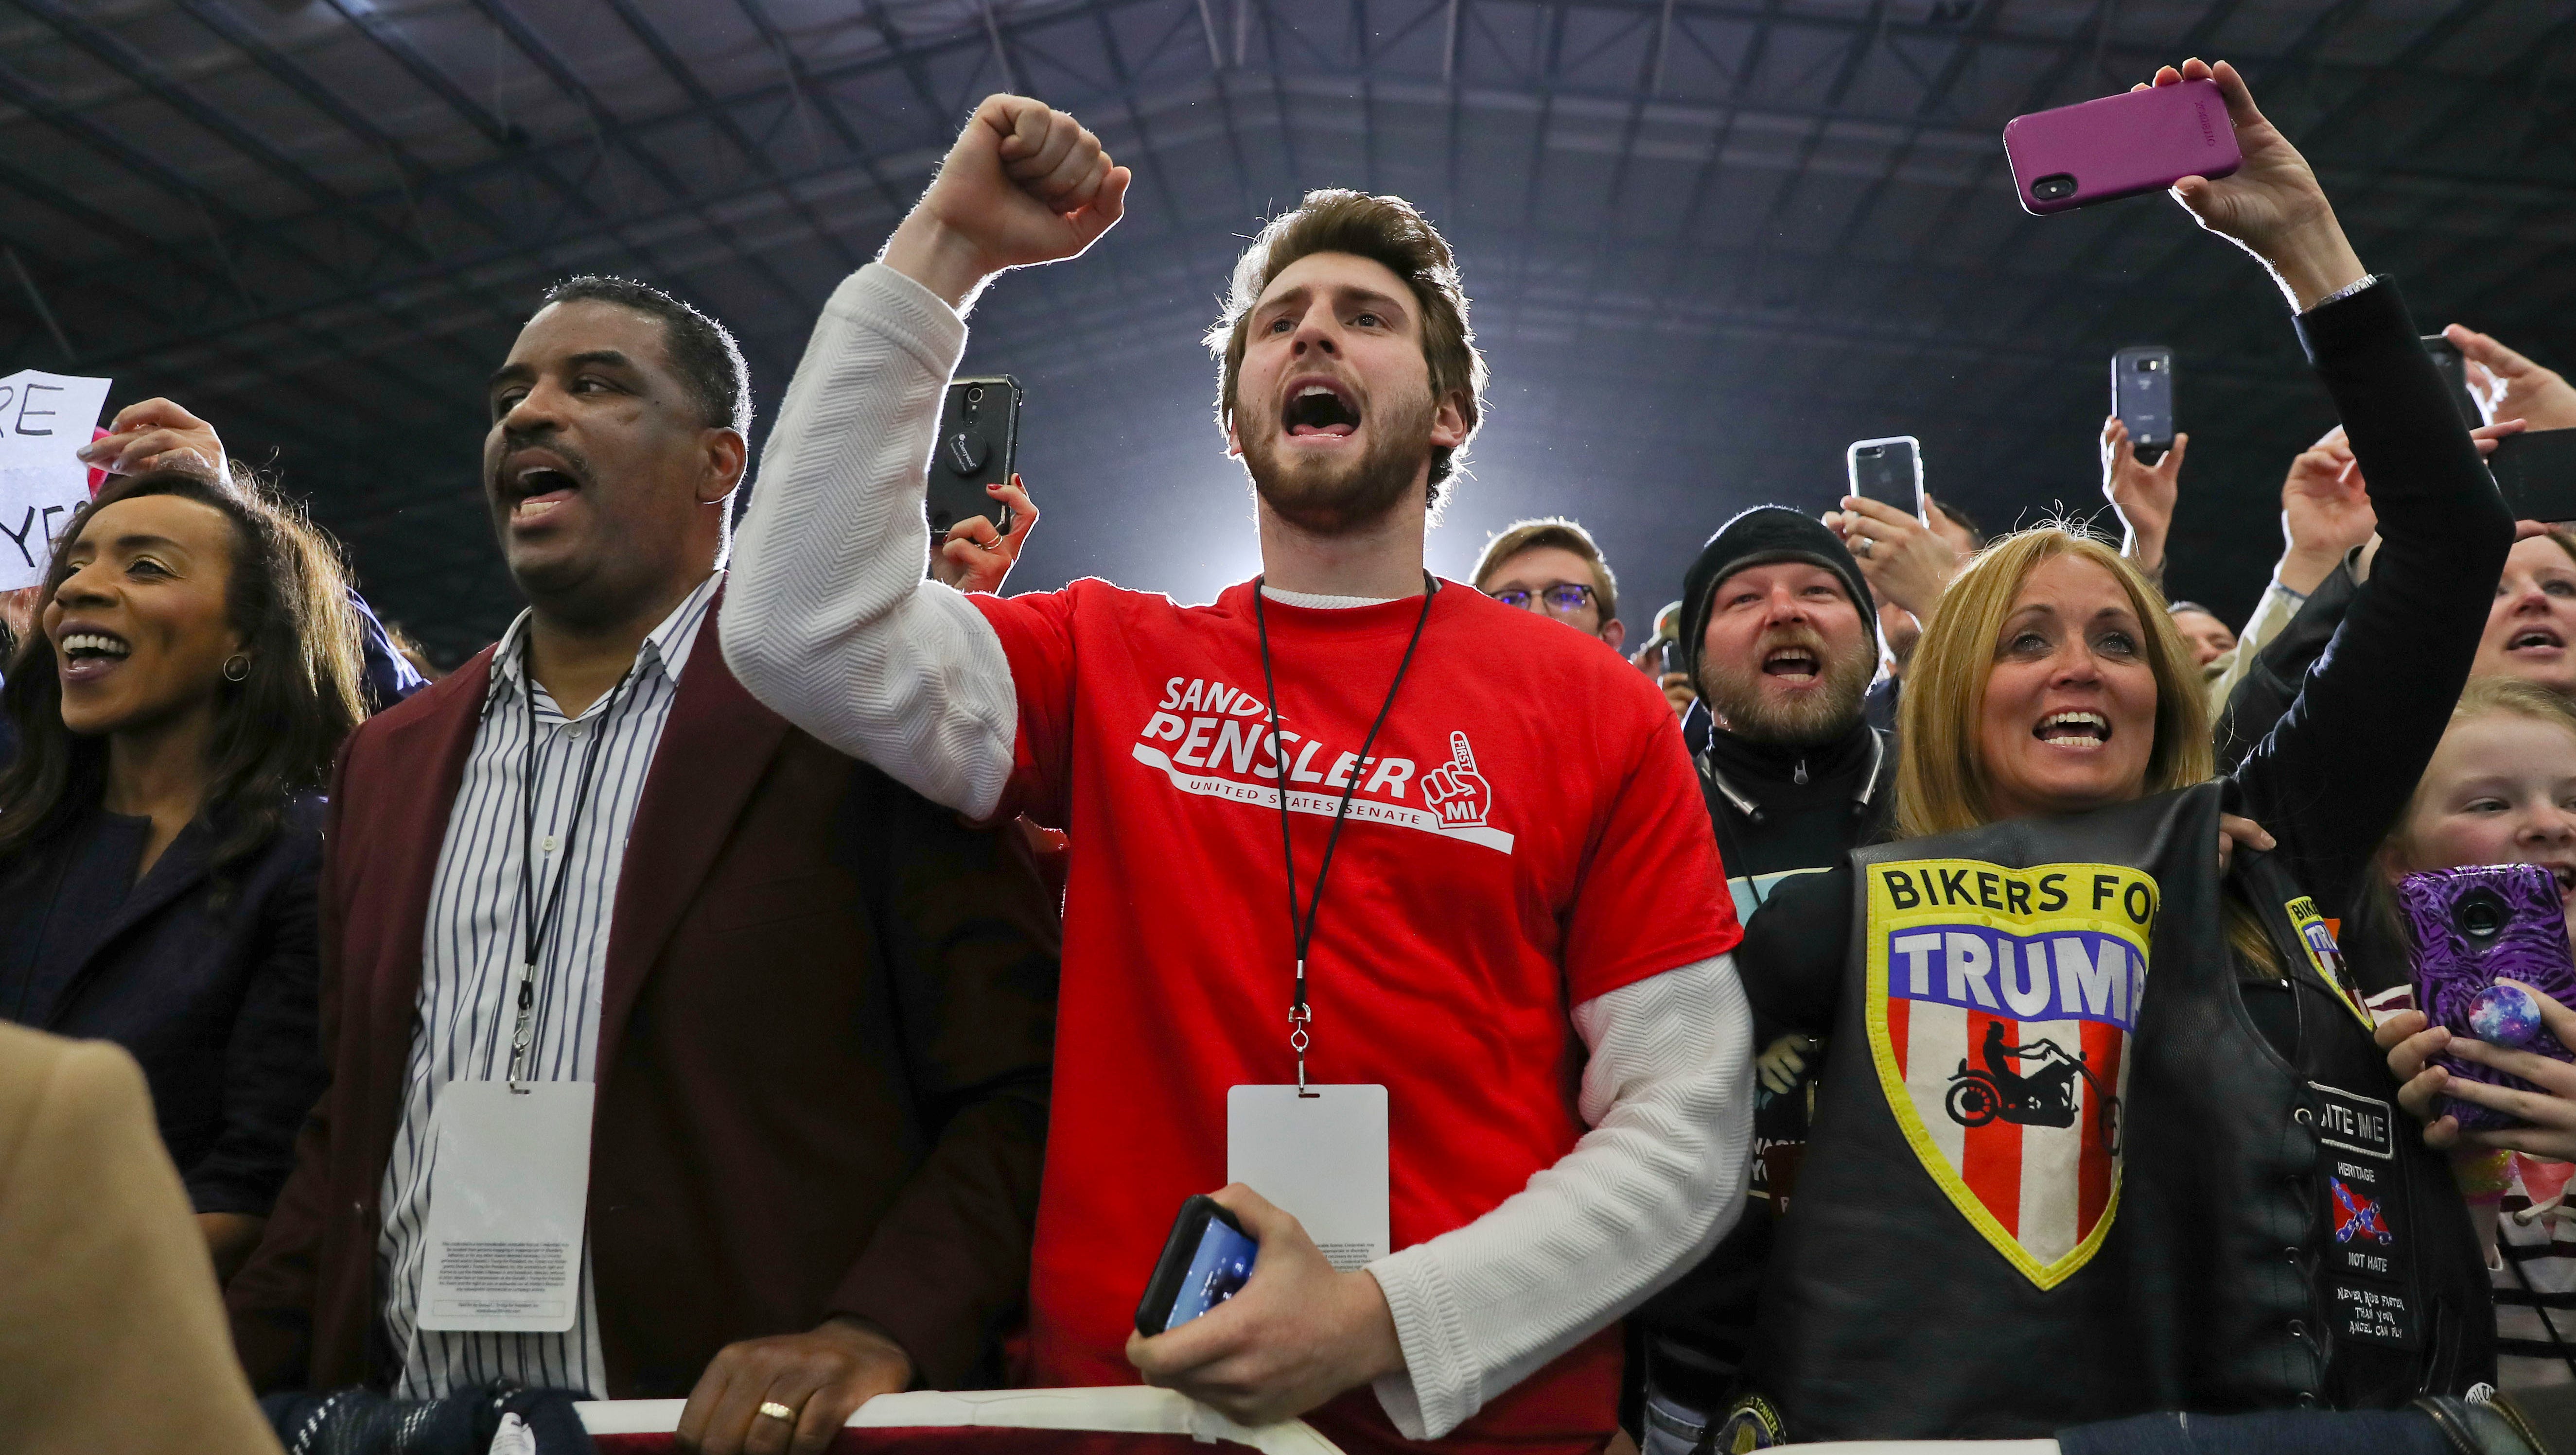 Supporters react to President Donald Trump being introduced at the rally,